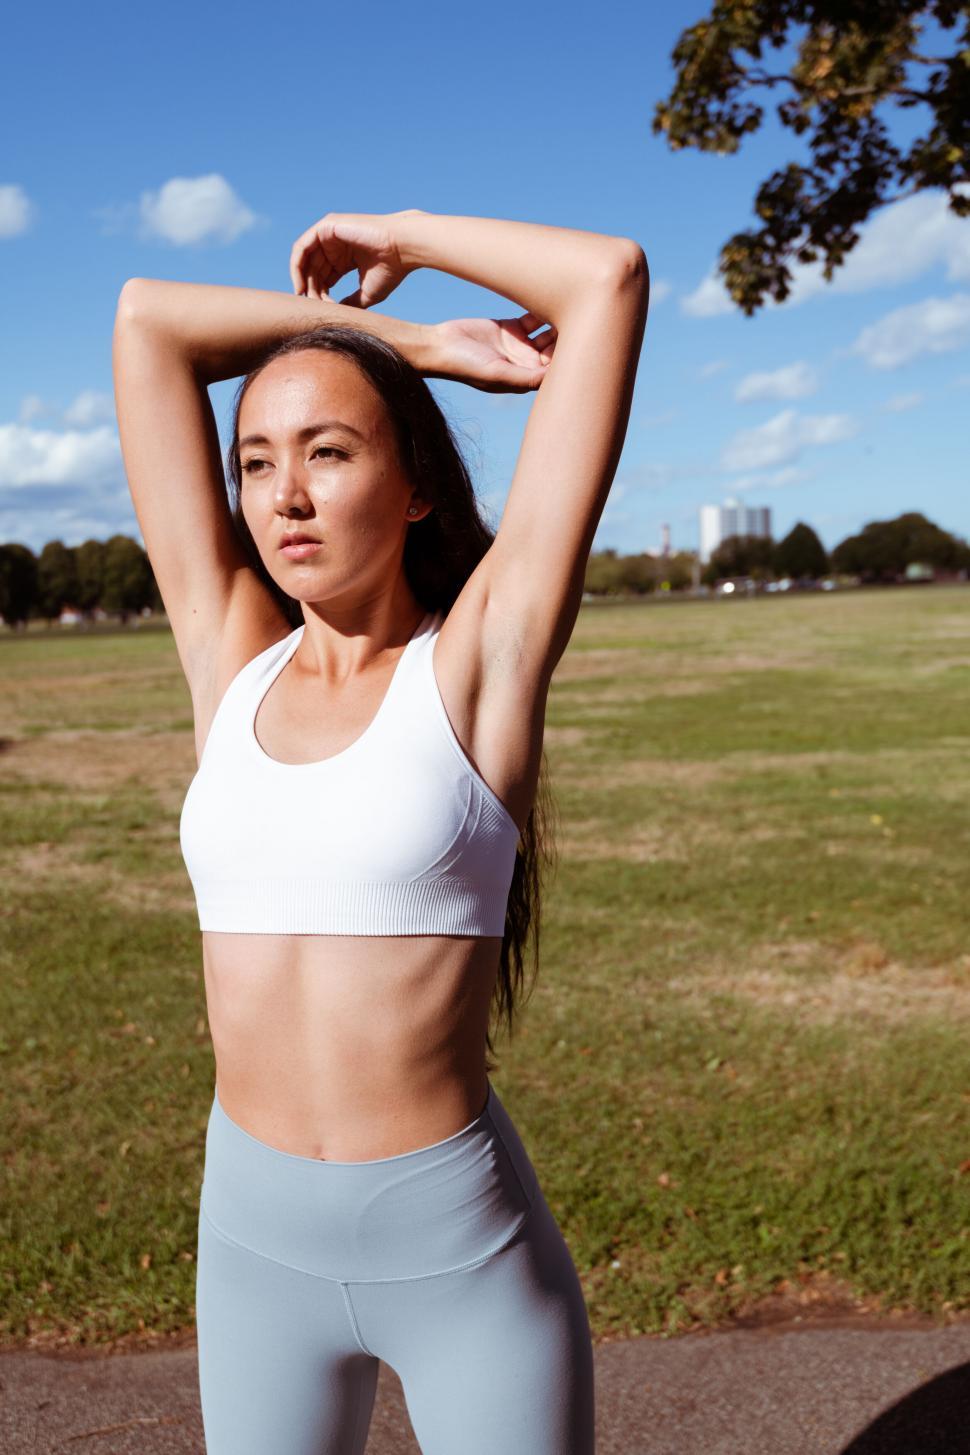 Free Image of Fitness attire in outdoor sunny setting 